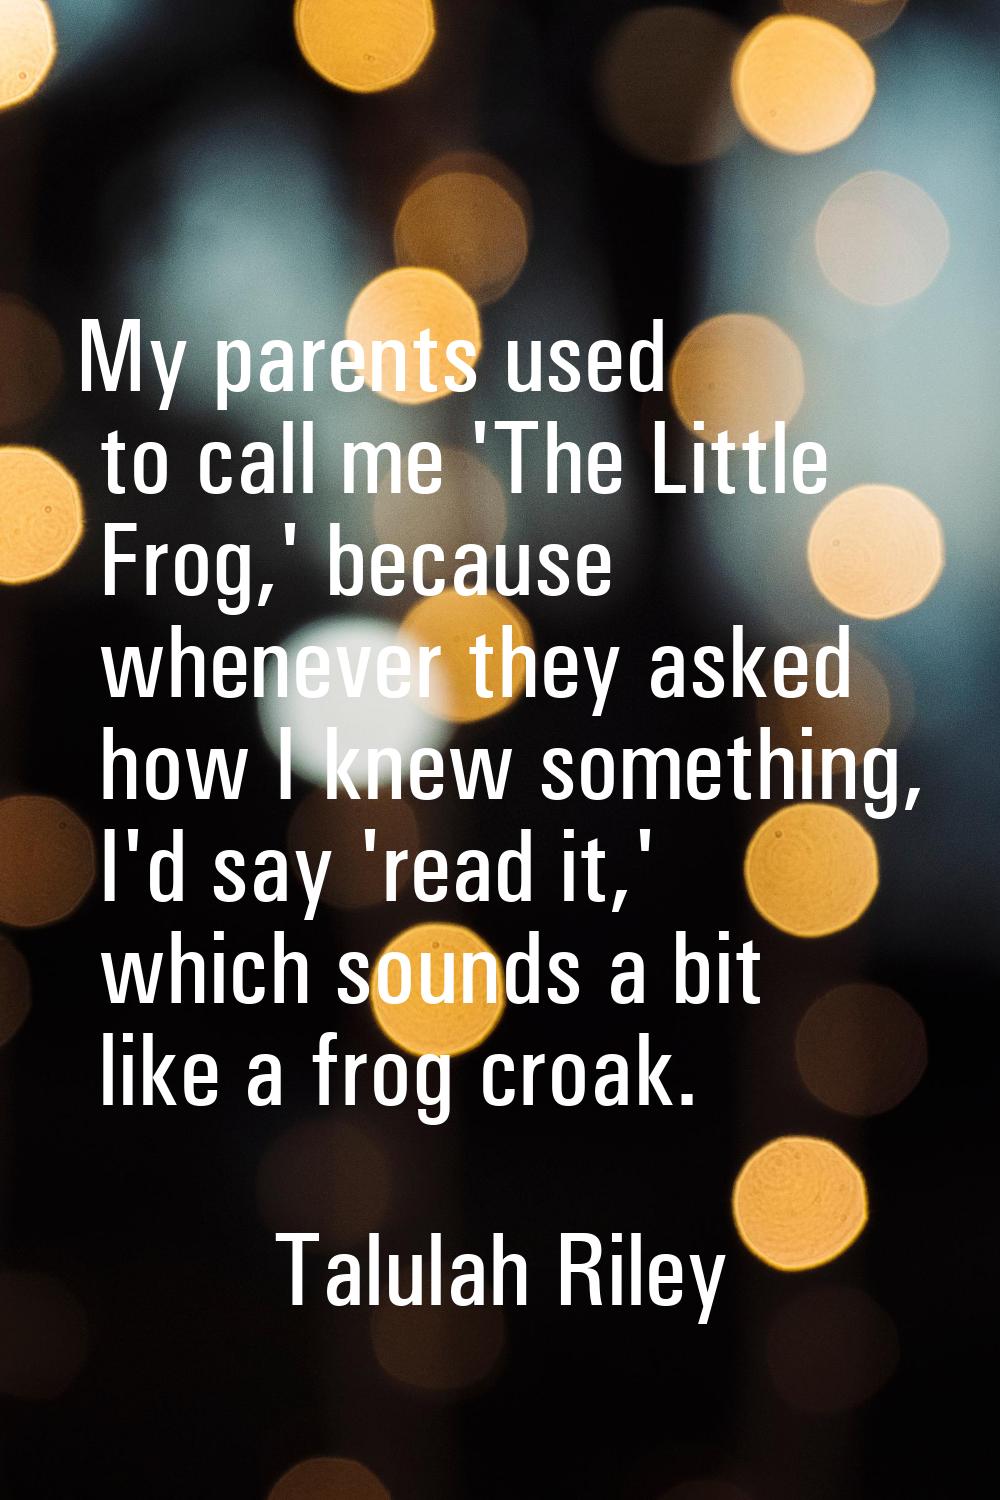 My parents used to call me 'The Little Frog,' because whenever they asked how I knew something, I'd